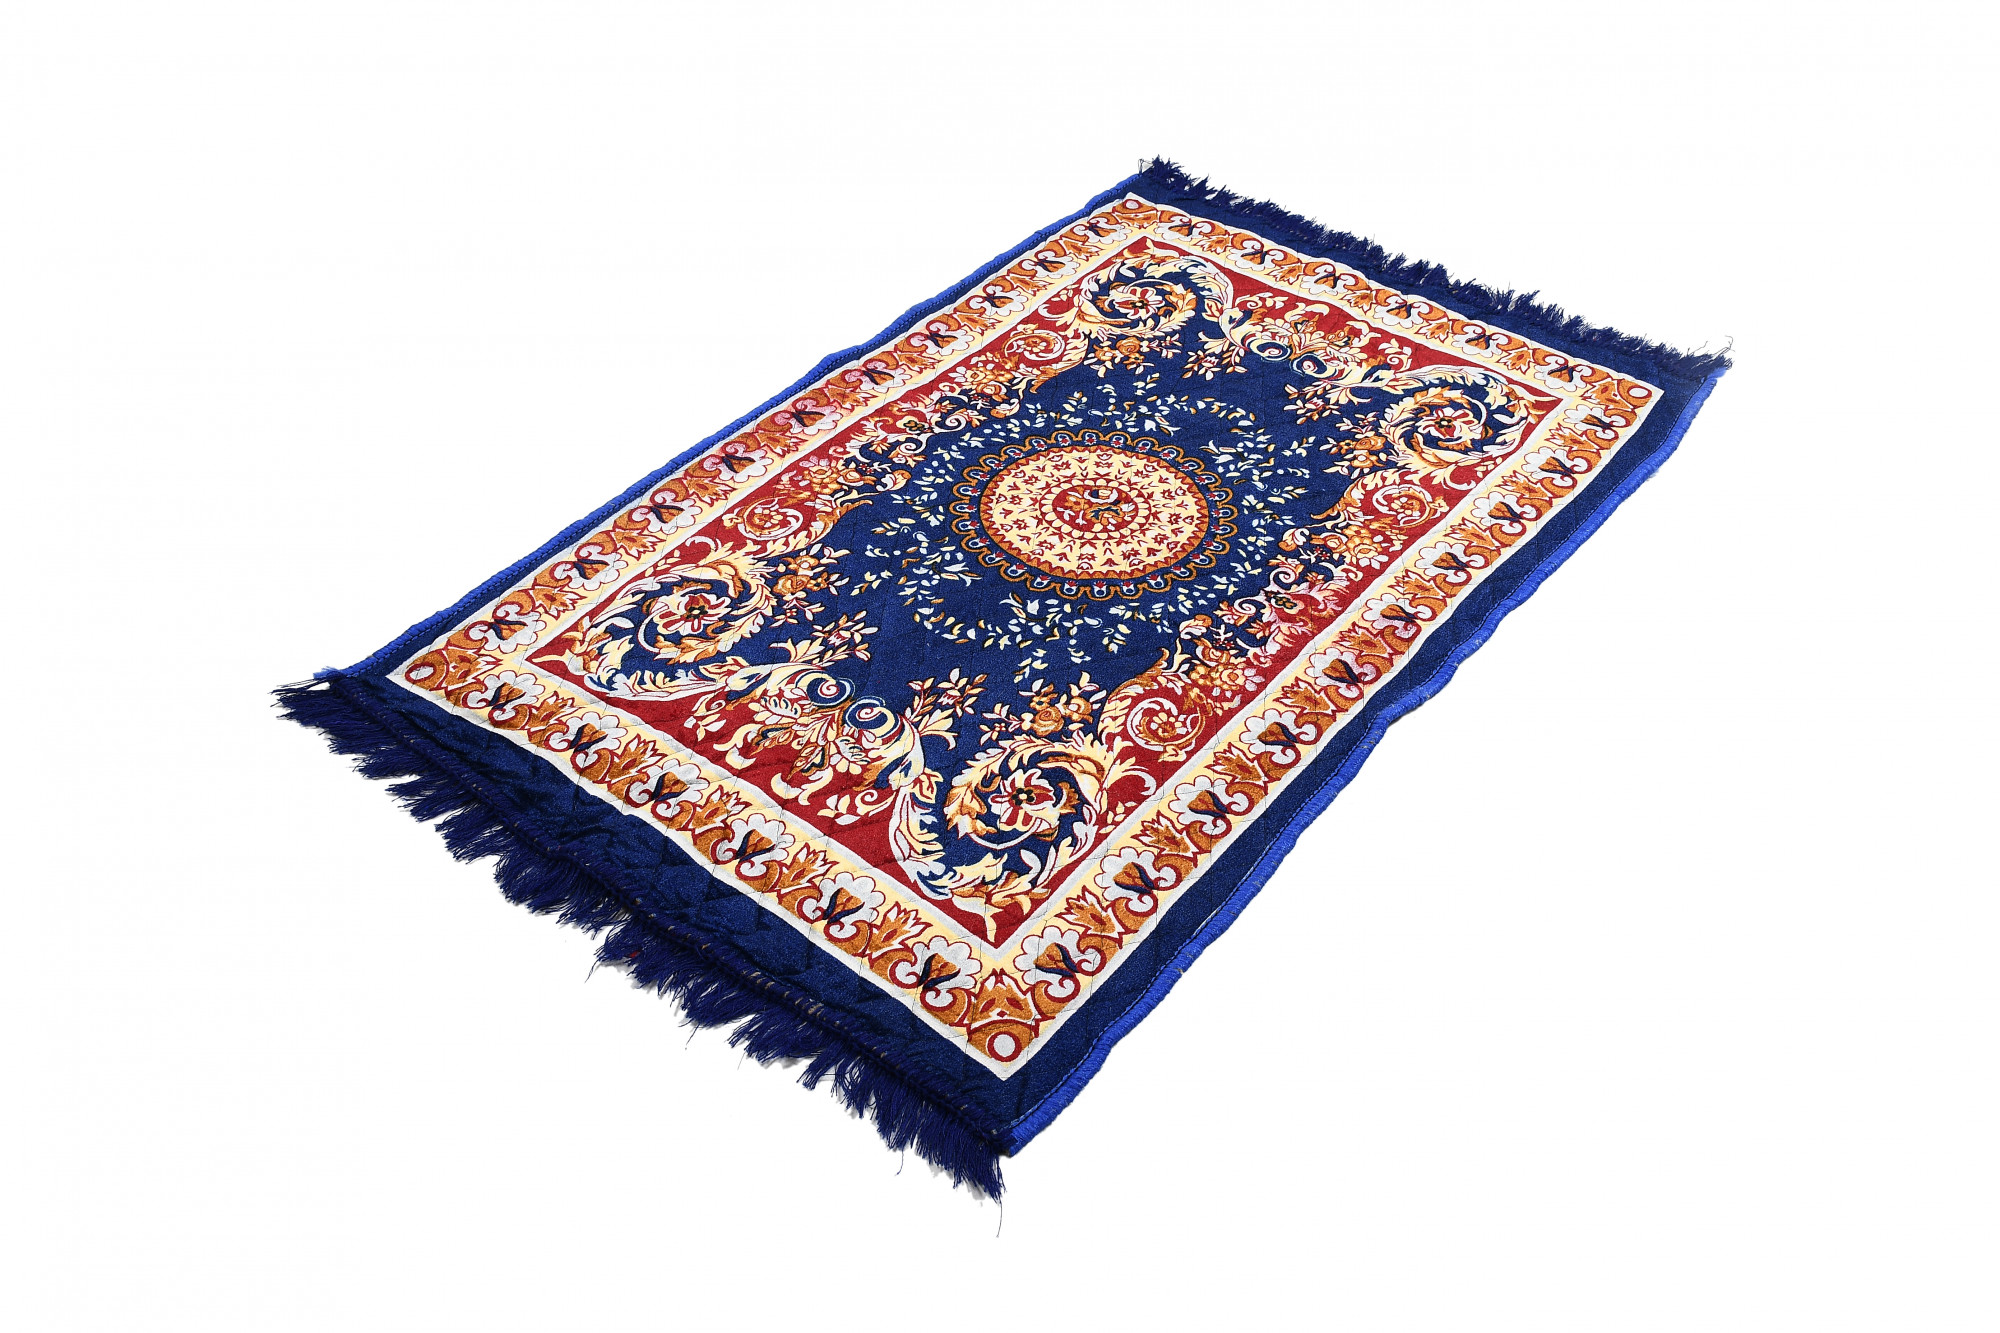 Kuber Industries Super Soft Area Rugs Silky Smooth Bedroom Mats for Living Room Kids Room Baby Room Dormitory Home Decor Carpet-4 x 2 Feet (Blue)